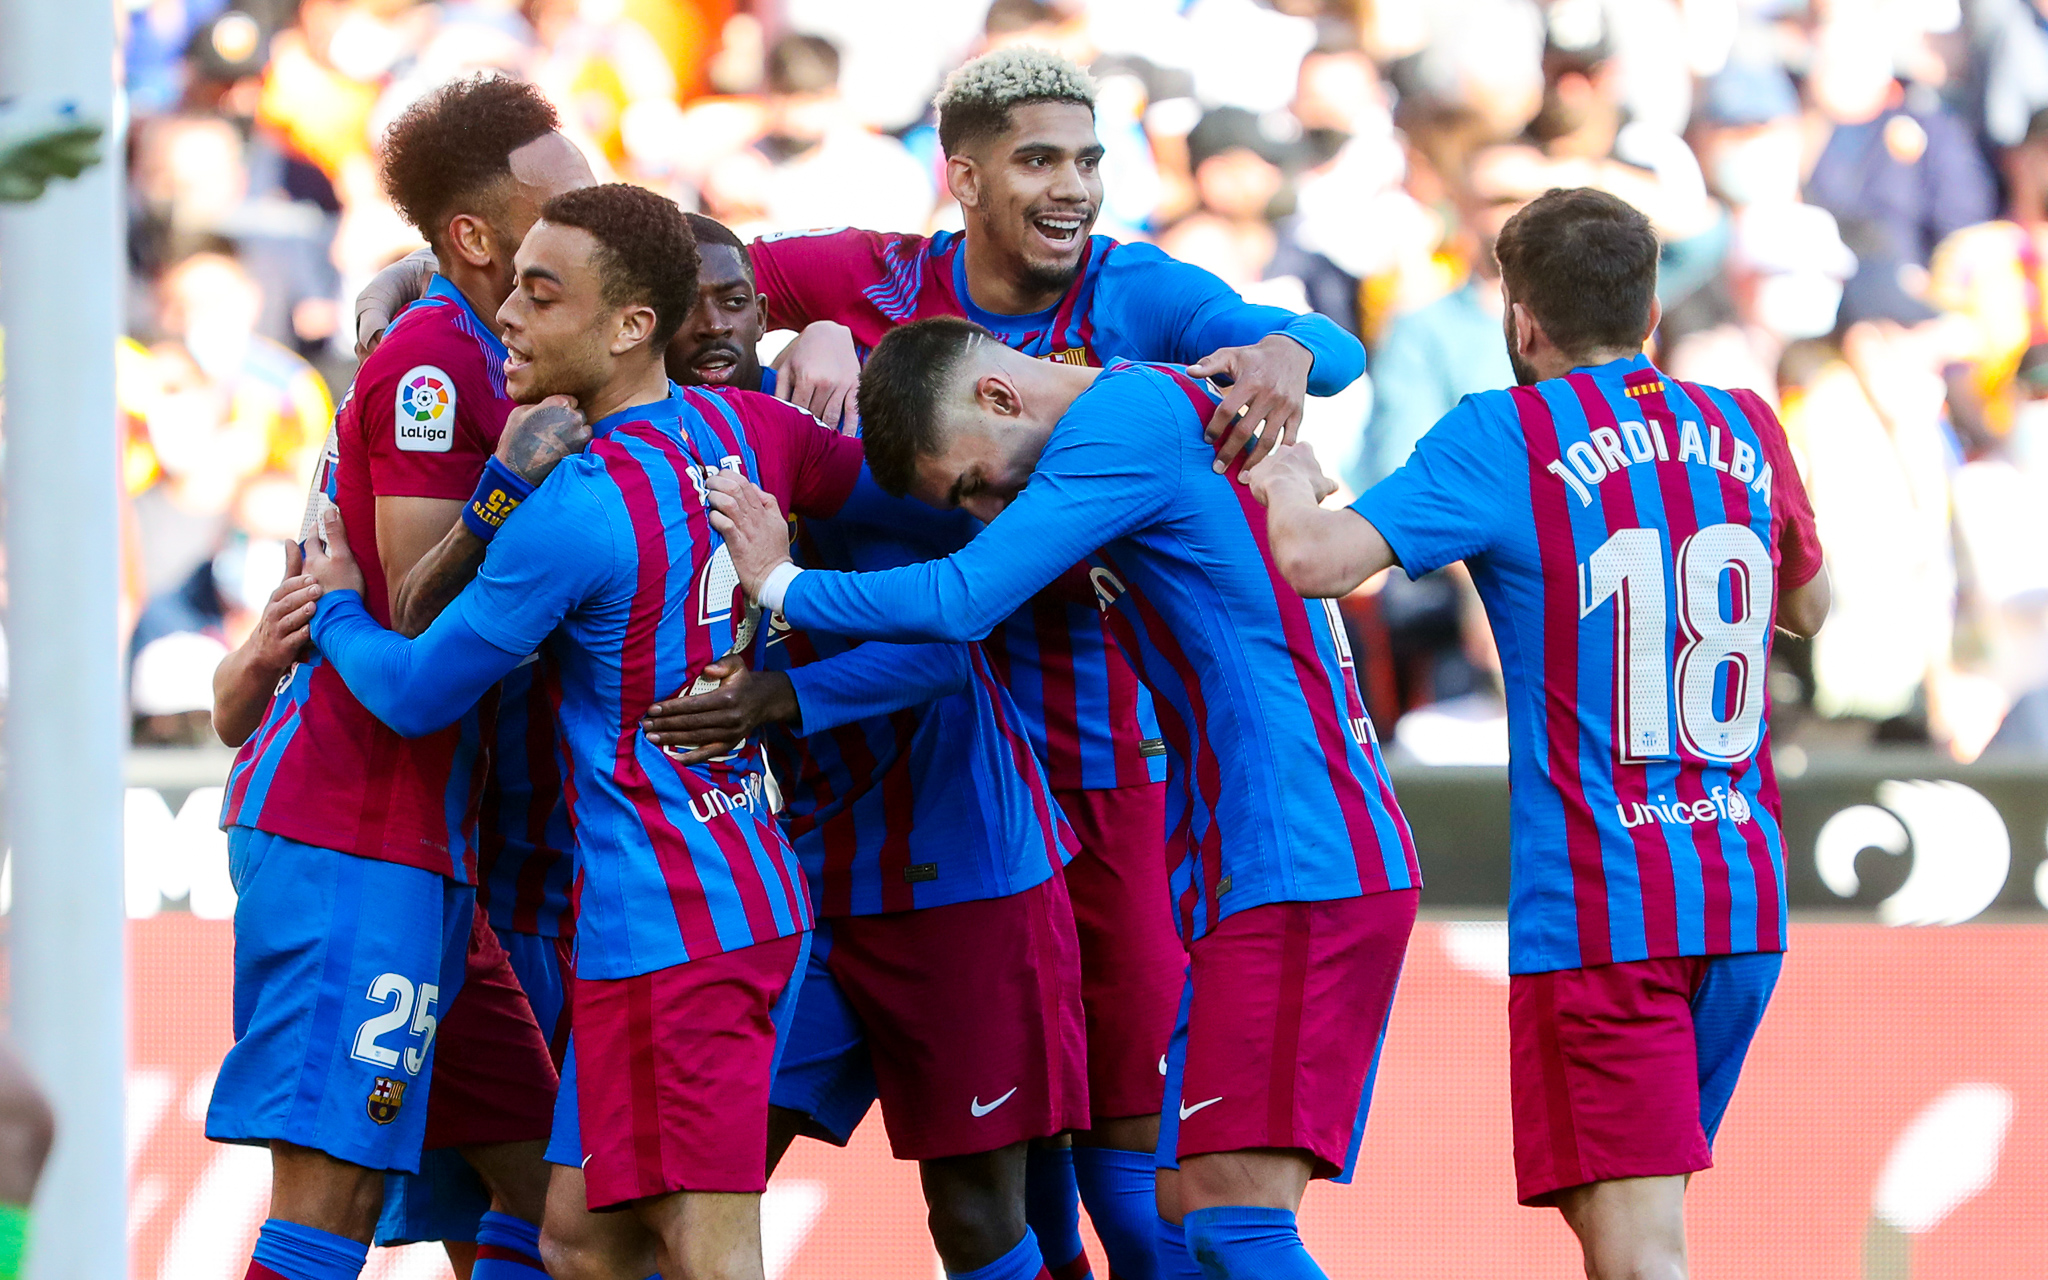 Valencia 1-4 Barcelona: Pierre-Emerick Aubameyang gets off the mark after scoring his first hattrick for Barcelona as they beat Valencia in stunning fashion 